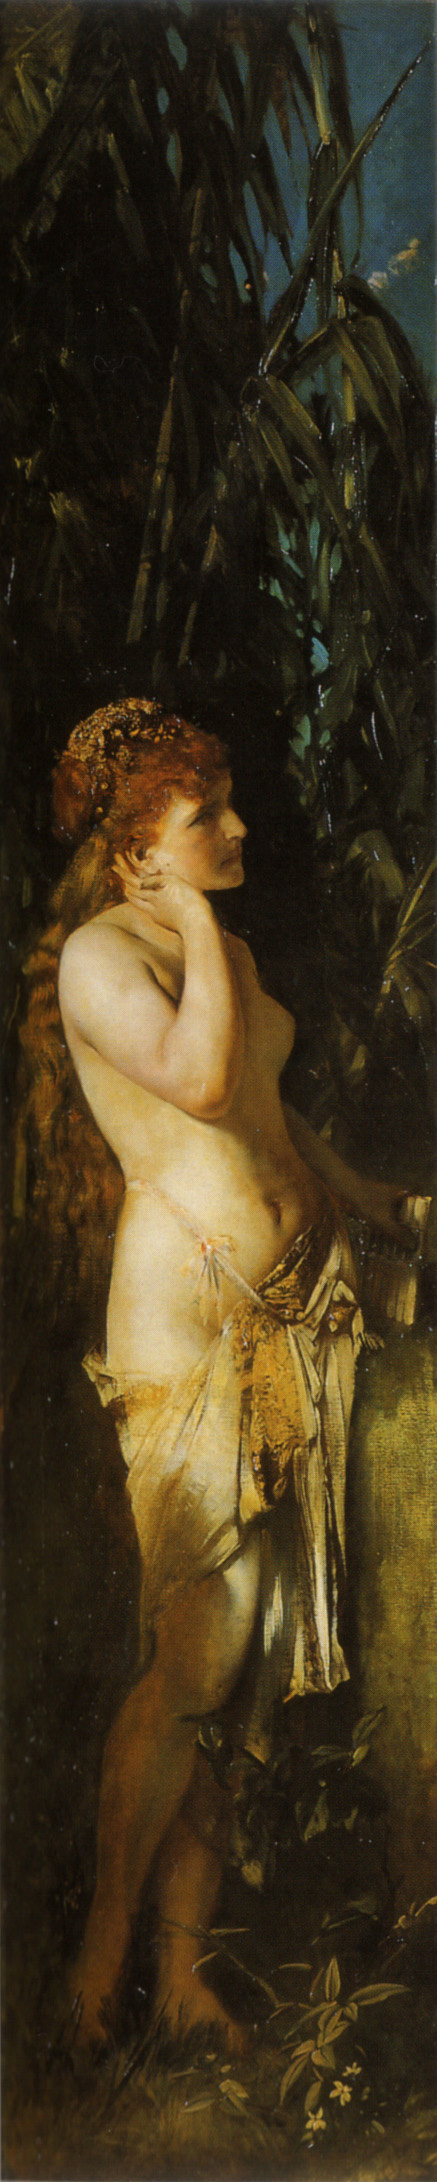 Hans Makart. Submission